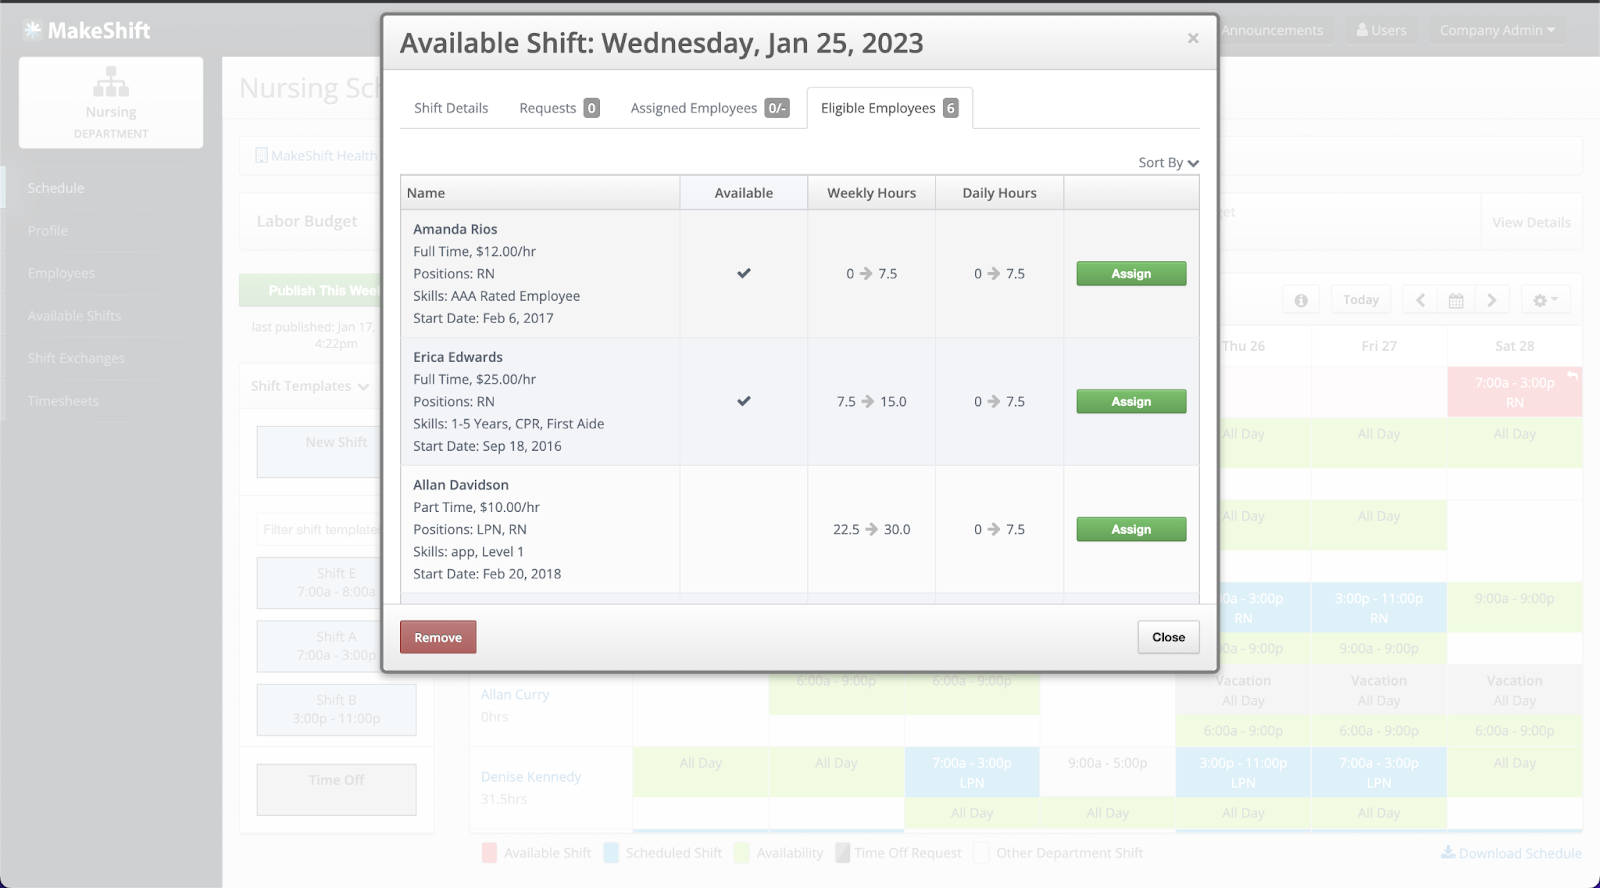 Shift swapping, time-off requests, and employee availability